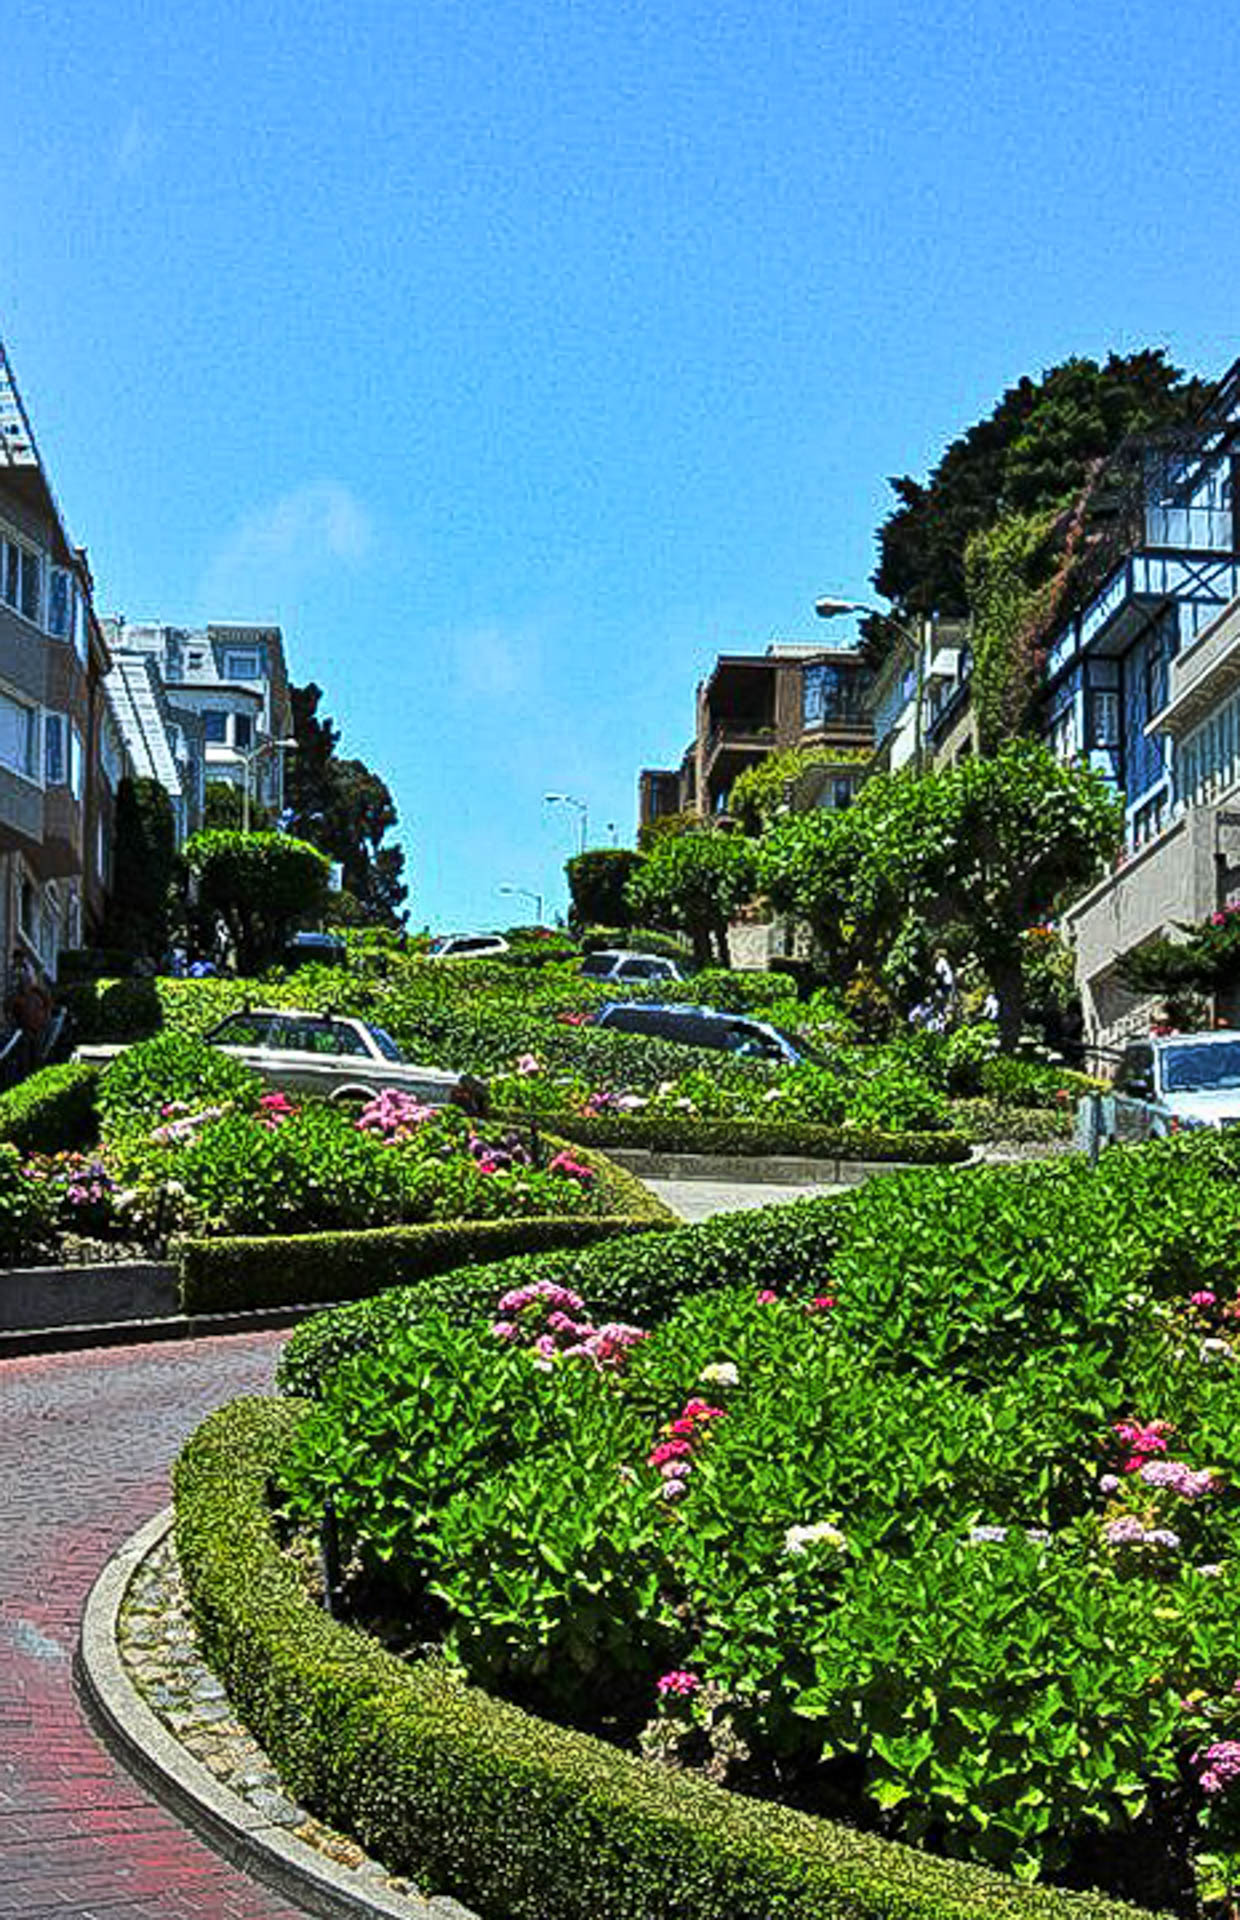 Lombard Street... the most crooked street in the world!